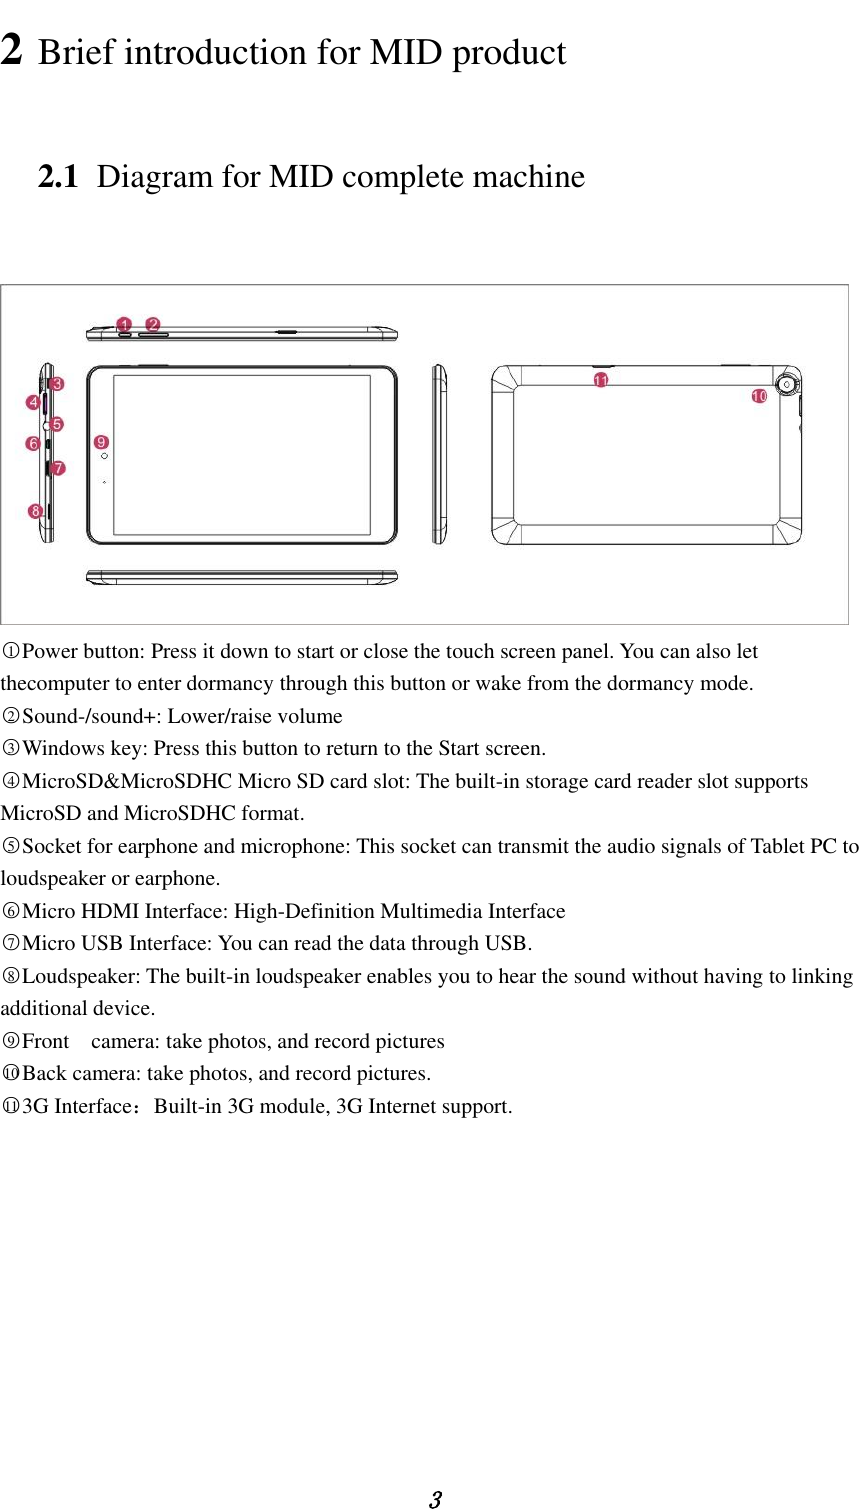    3 2 Brief introduction for MID product 2.1 Diagram for MID complete machine   ○1Power button: Press it down to start or close the touch screen panel. You can also let thecomputer to enter dormancy through this button or wake from the dormancy mode. ○2Sound-/sound+: Lower/raise volume ○3Windows key: Press this button to return to the Start screen. ○4MicroSD&amp;MicroSDHC Micro SD card slot: The built-in storage card reader slot supports MicroSD and MicroSDHC format. ○5Socket for earphone and microphone: This socket can transmit the audio signals of Tablet PC to   loudspeaker or earphone.     ○6Micro HDMI Interface: High-Definition Multimedia Interface ○7Micro USB Interface: You can read the data through USB. ○8Loudspeaker: The built-in loudspeaker enables you to hear the sound without having to linking additional device.     ○9Front    camera: take photos, and record pictures ○10 Back camera: take photos, and record pictures. ○11 3G Interface：Built-in 3G module, 3G Internet support.     